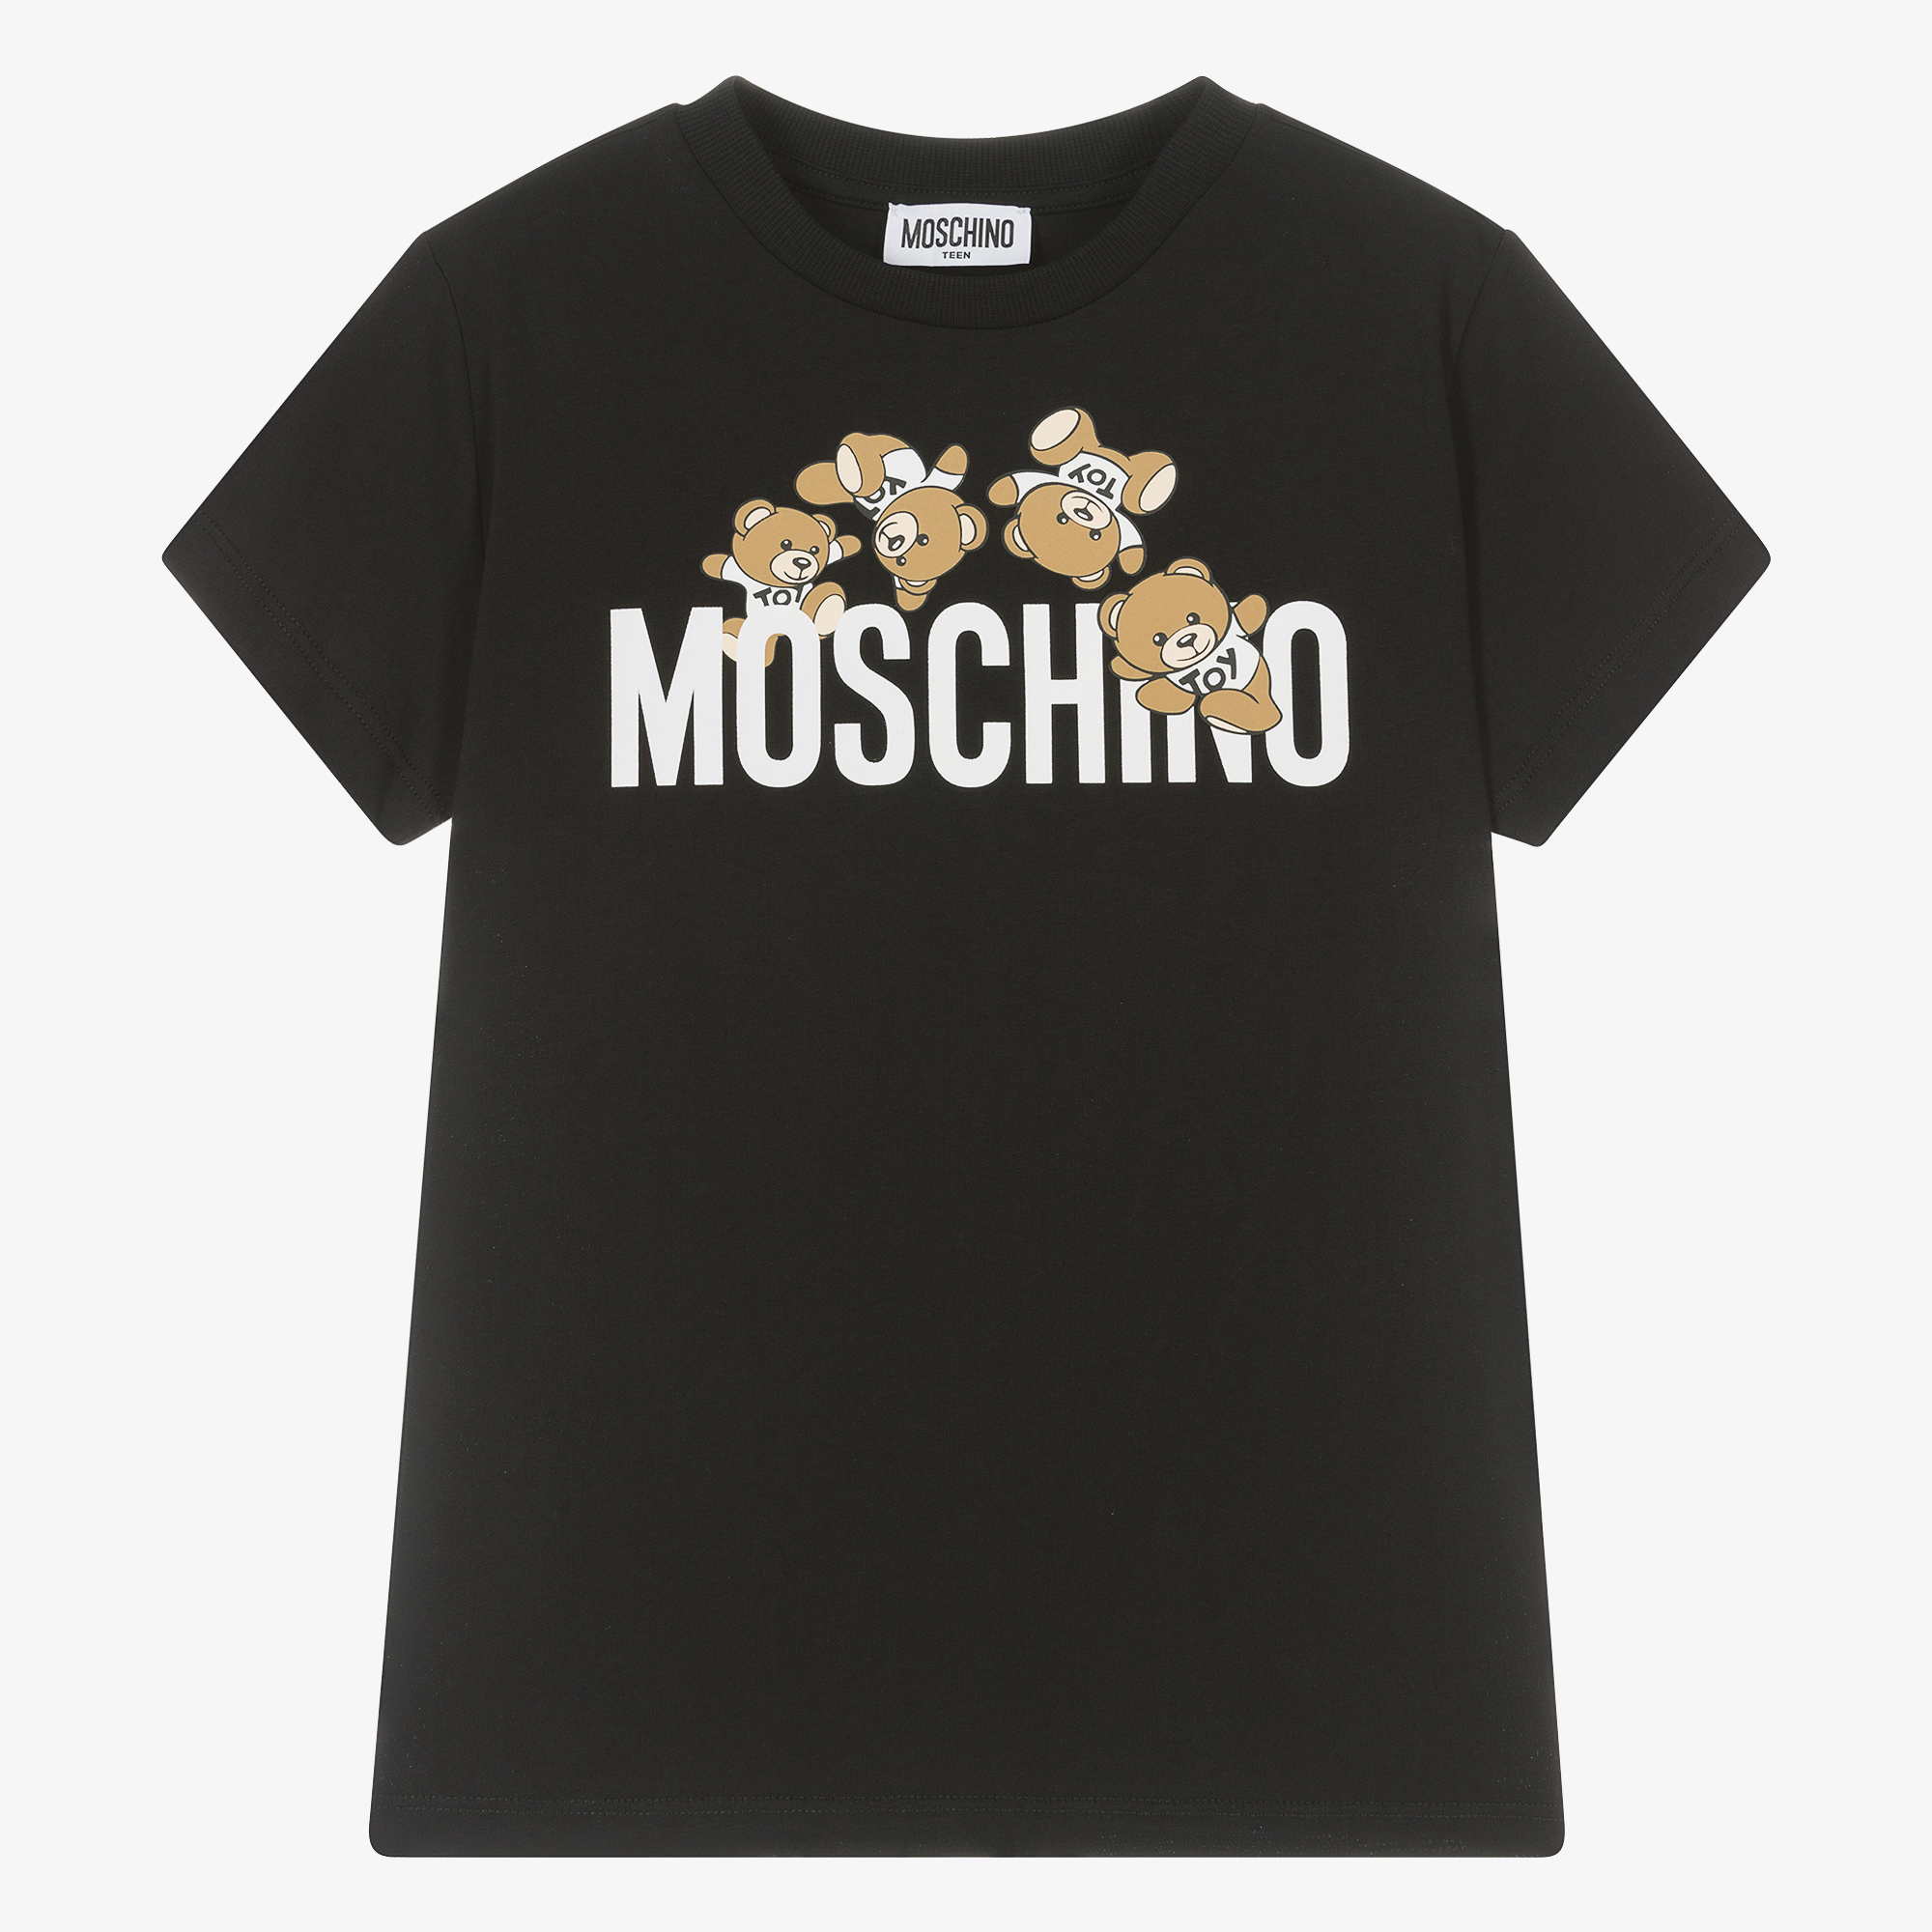 MOSSIMO T-SHIRT FOR KIDS BRAND NEW CAN BE BOTH FOR BOYS AND GIRLS